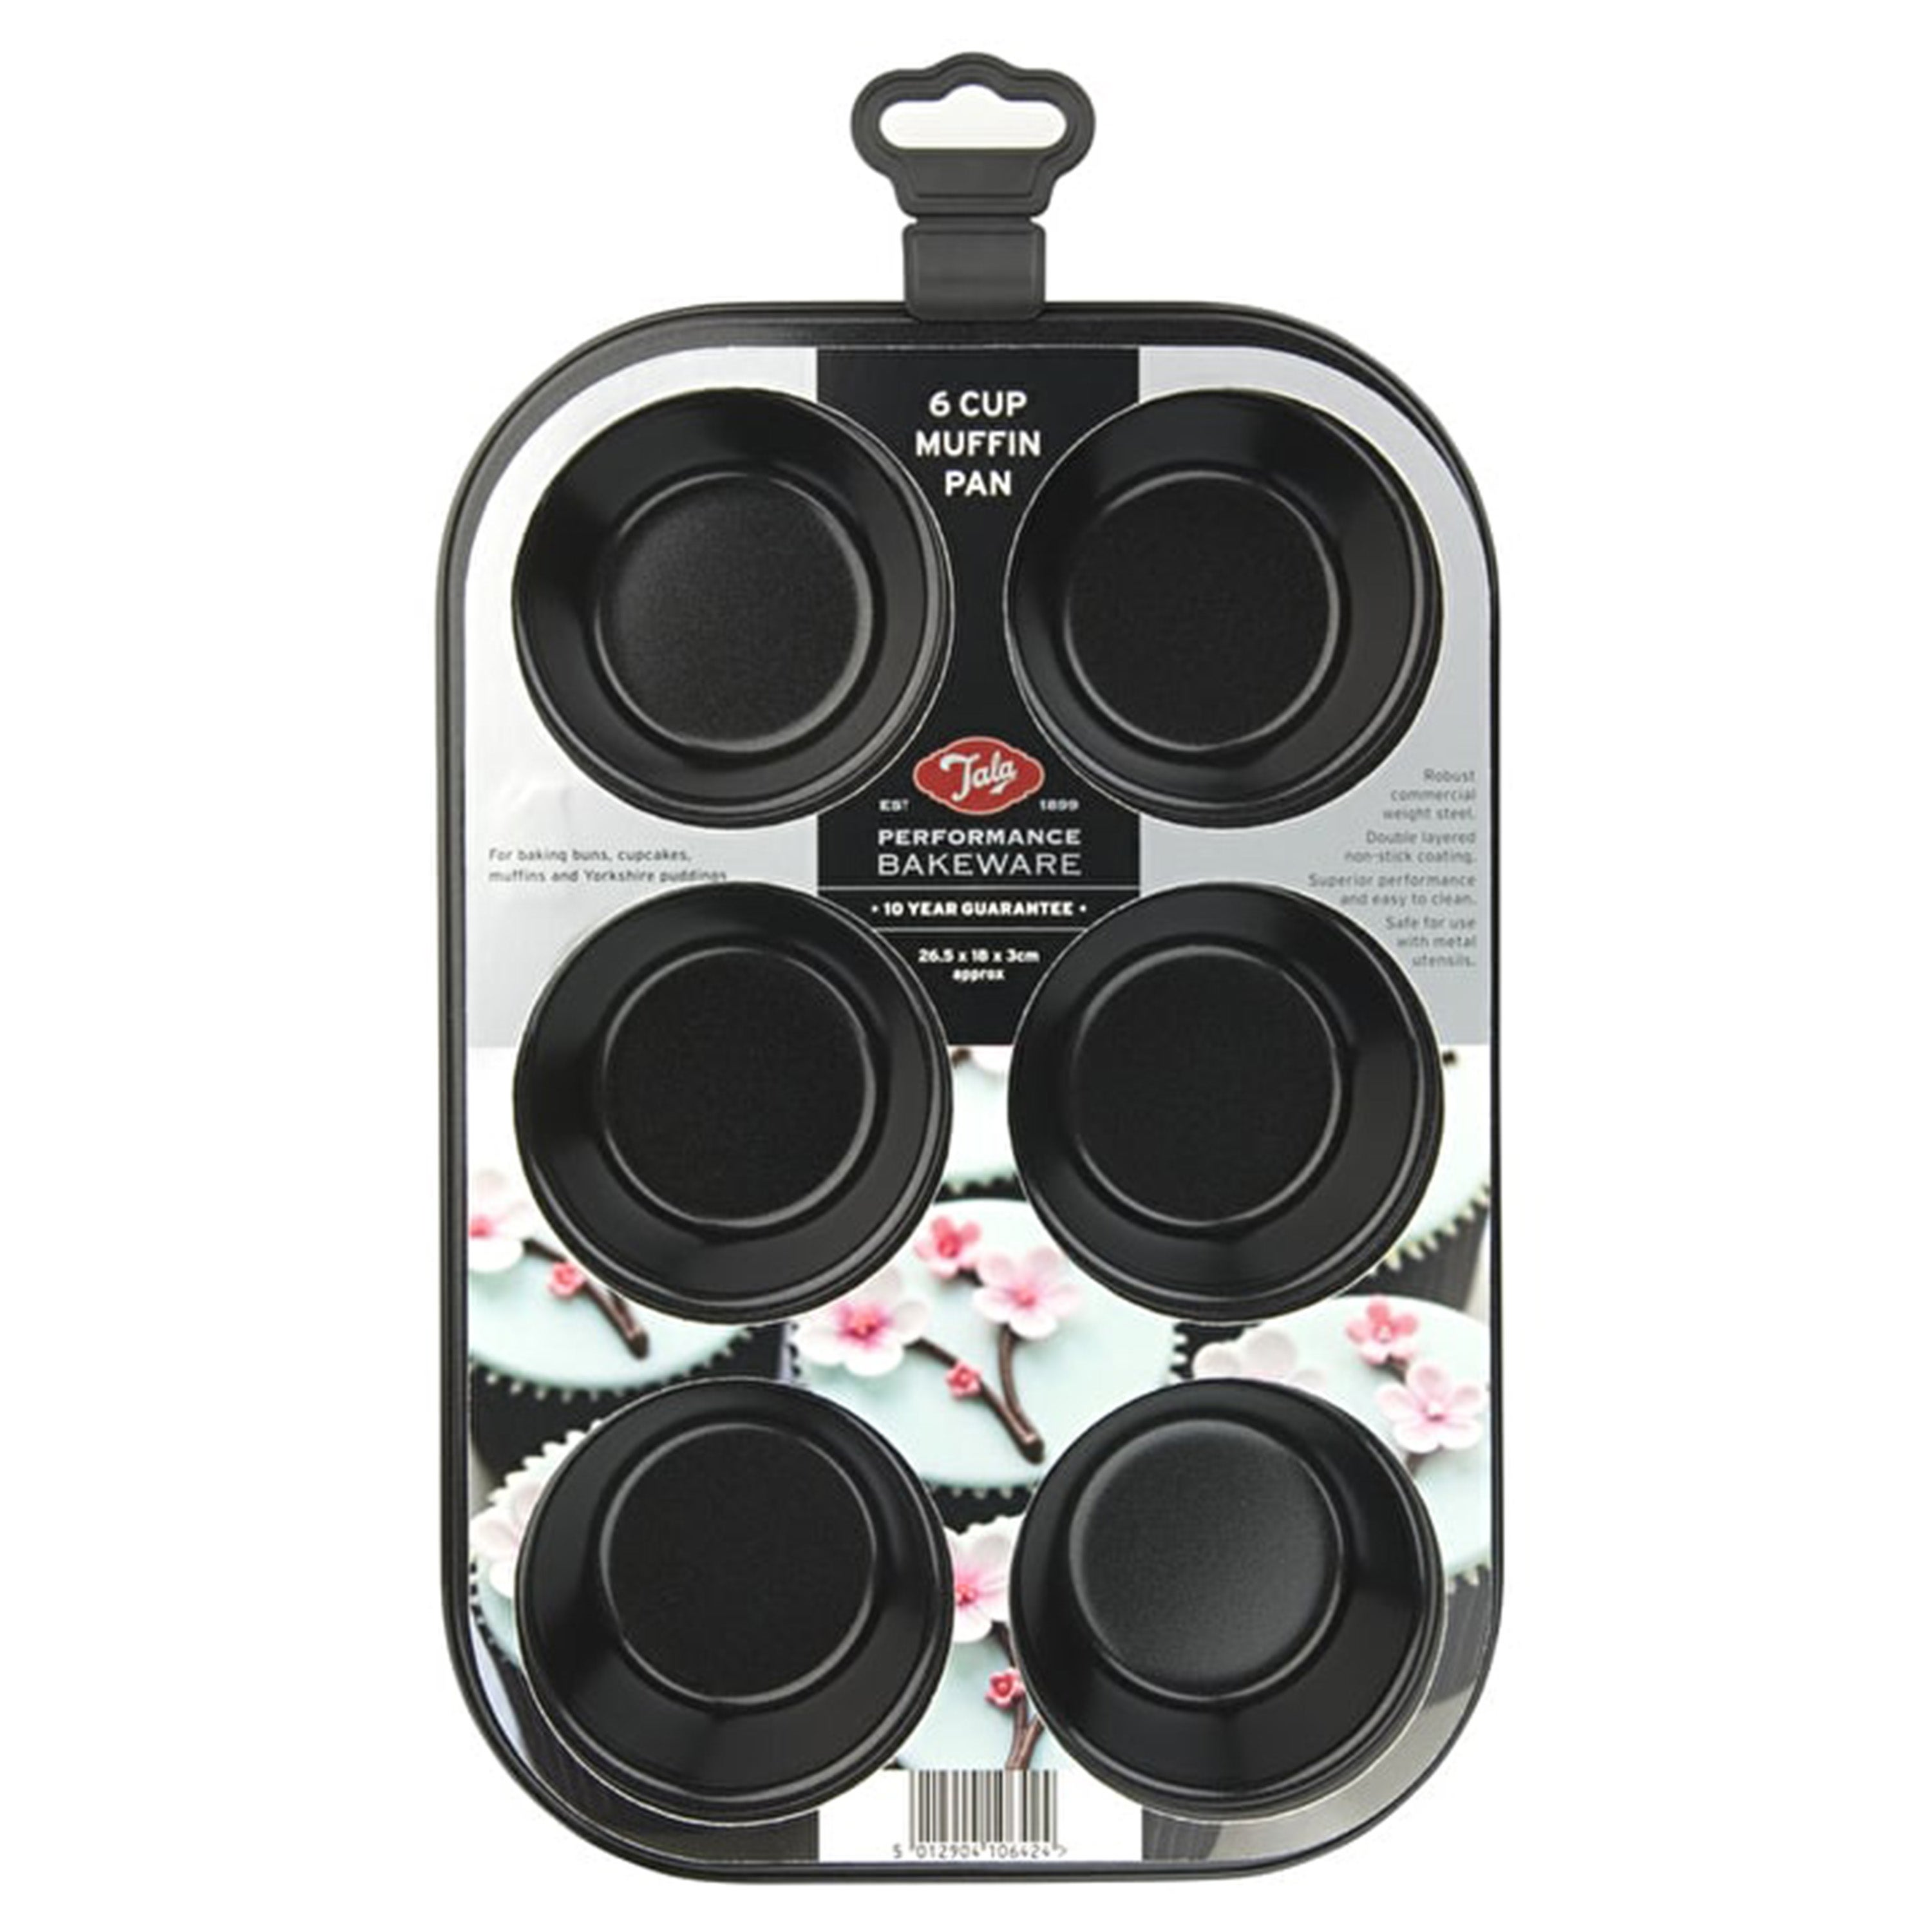 Tala Performance 6 Cup Muffin Tray